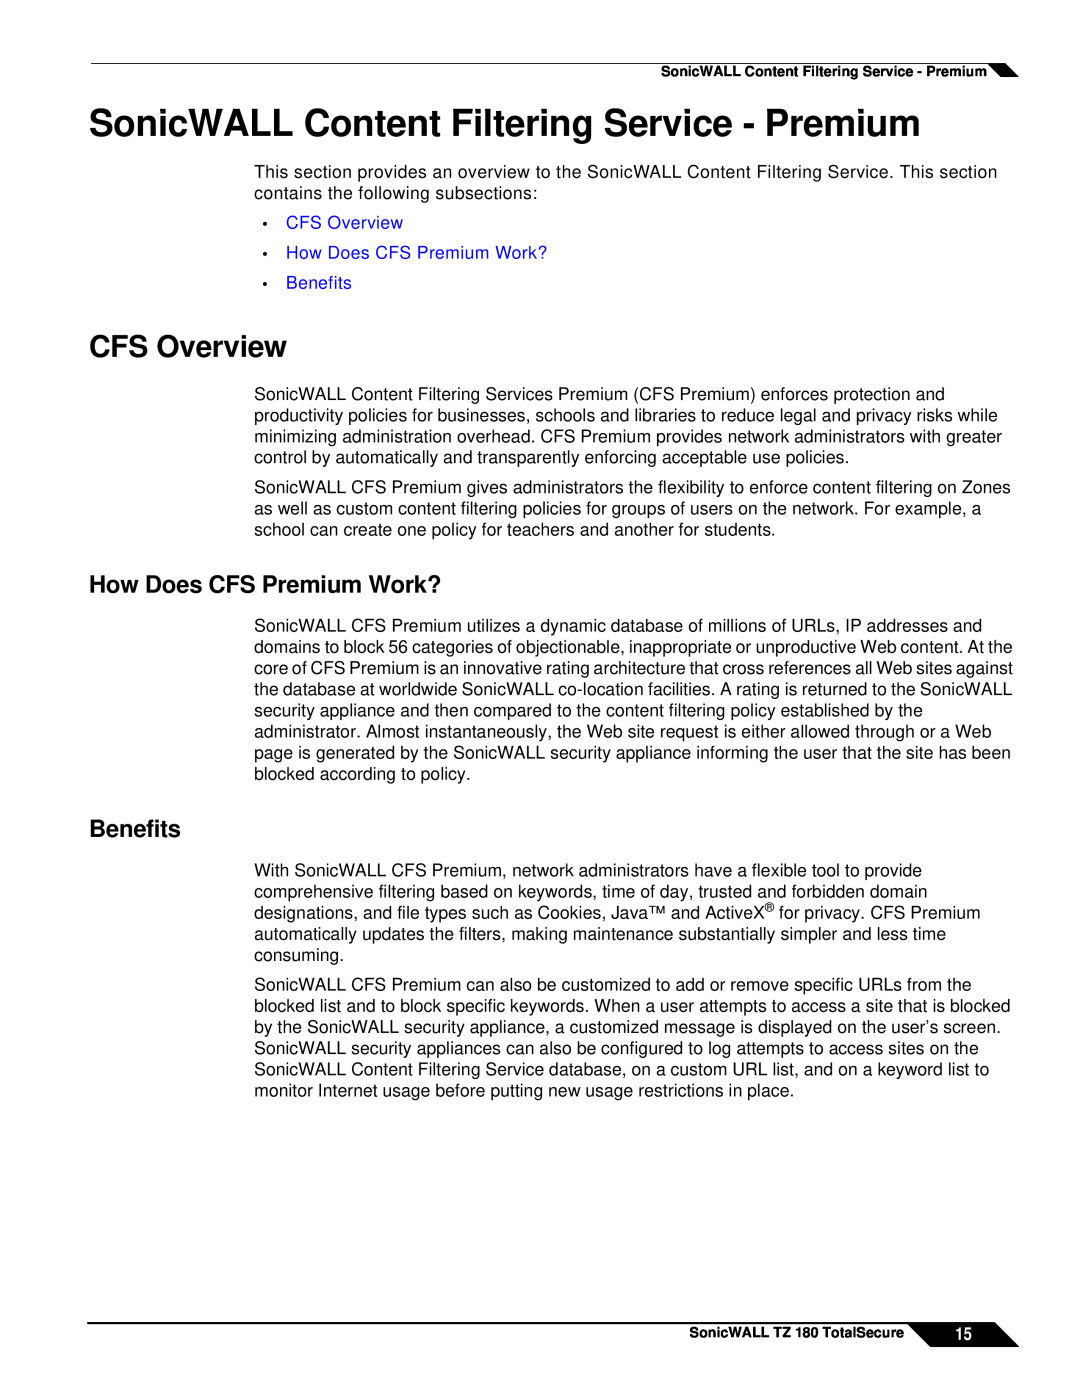 SonicWALL TZ 180 manual SonicWALL Content Filtering Service - Premium, CFS Overview, How Does CFS Premium Work?, Benefits 